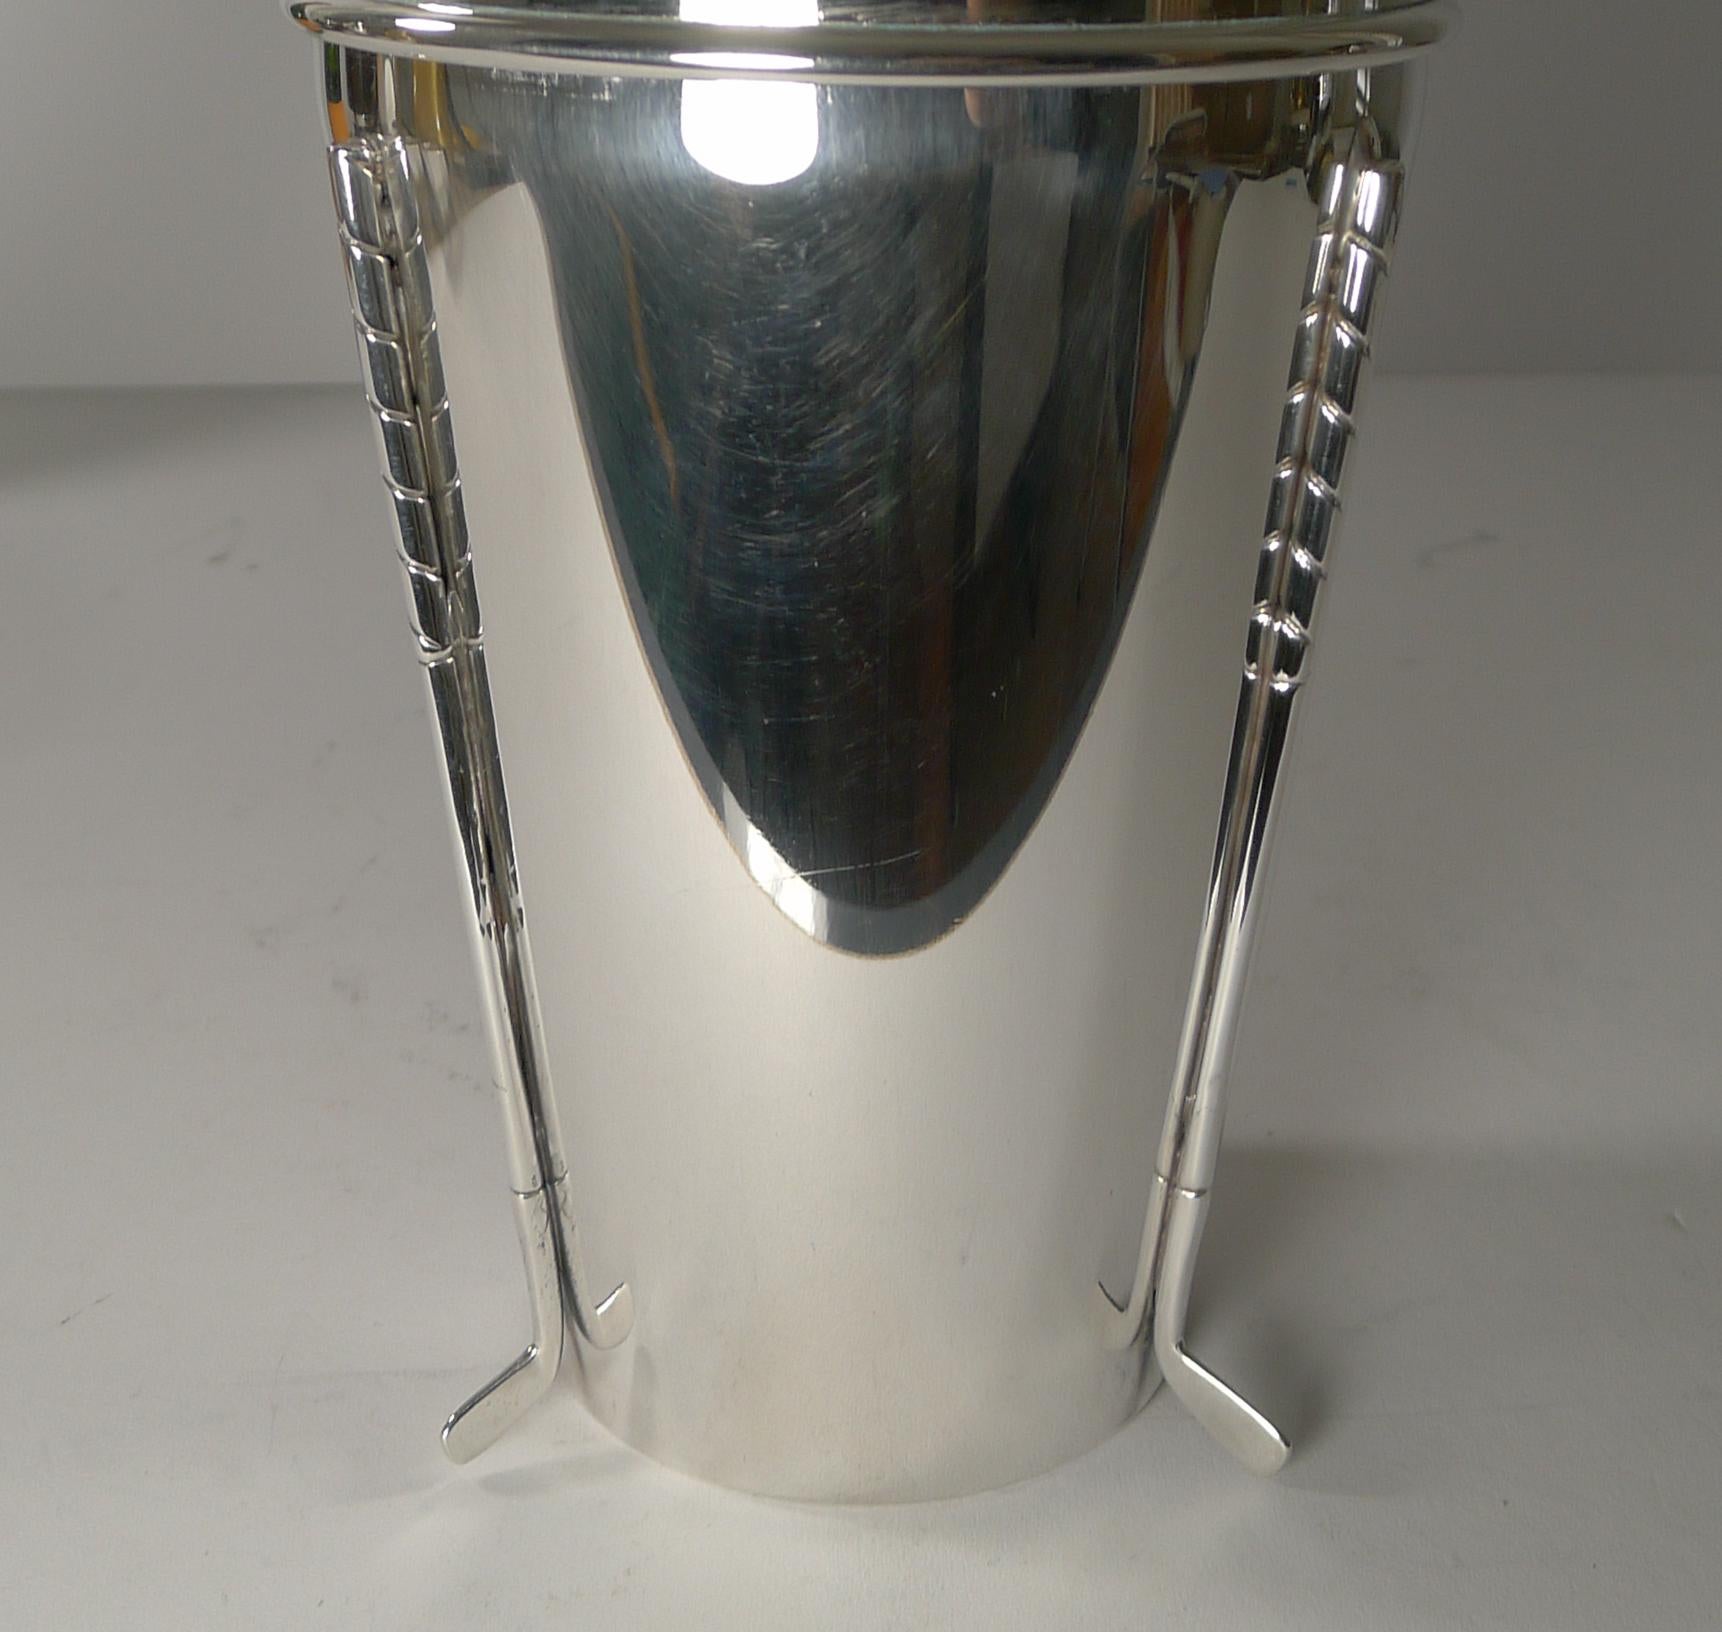 Art Deco Rare Large English Golfing Cocktail Shaker by Walker & Hall c.1930